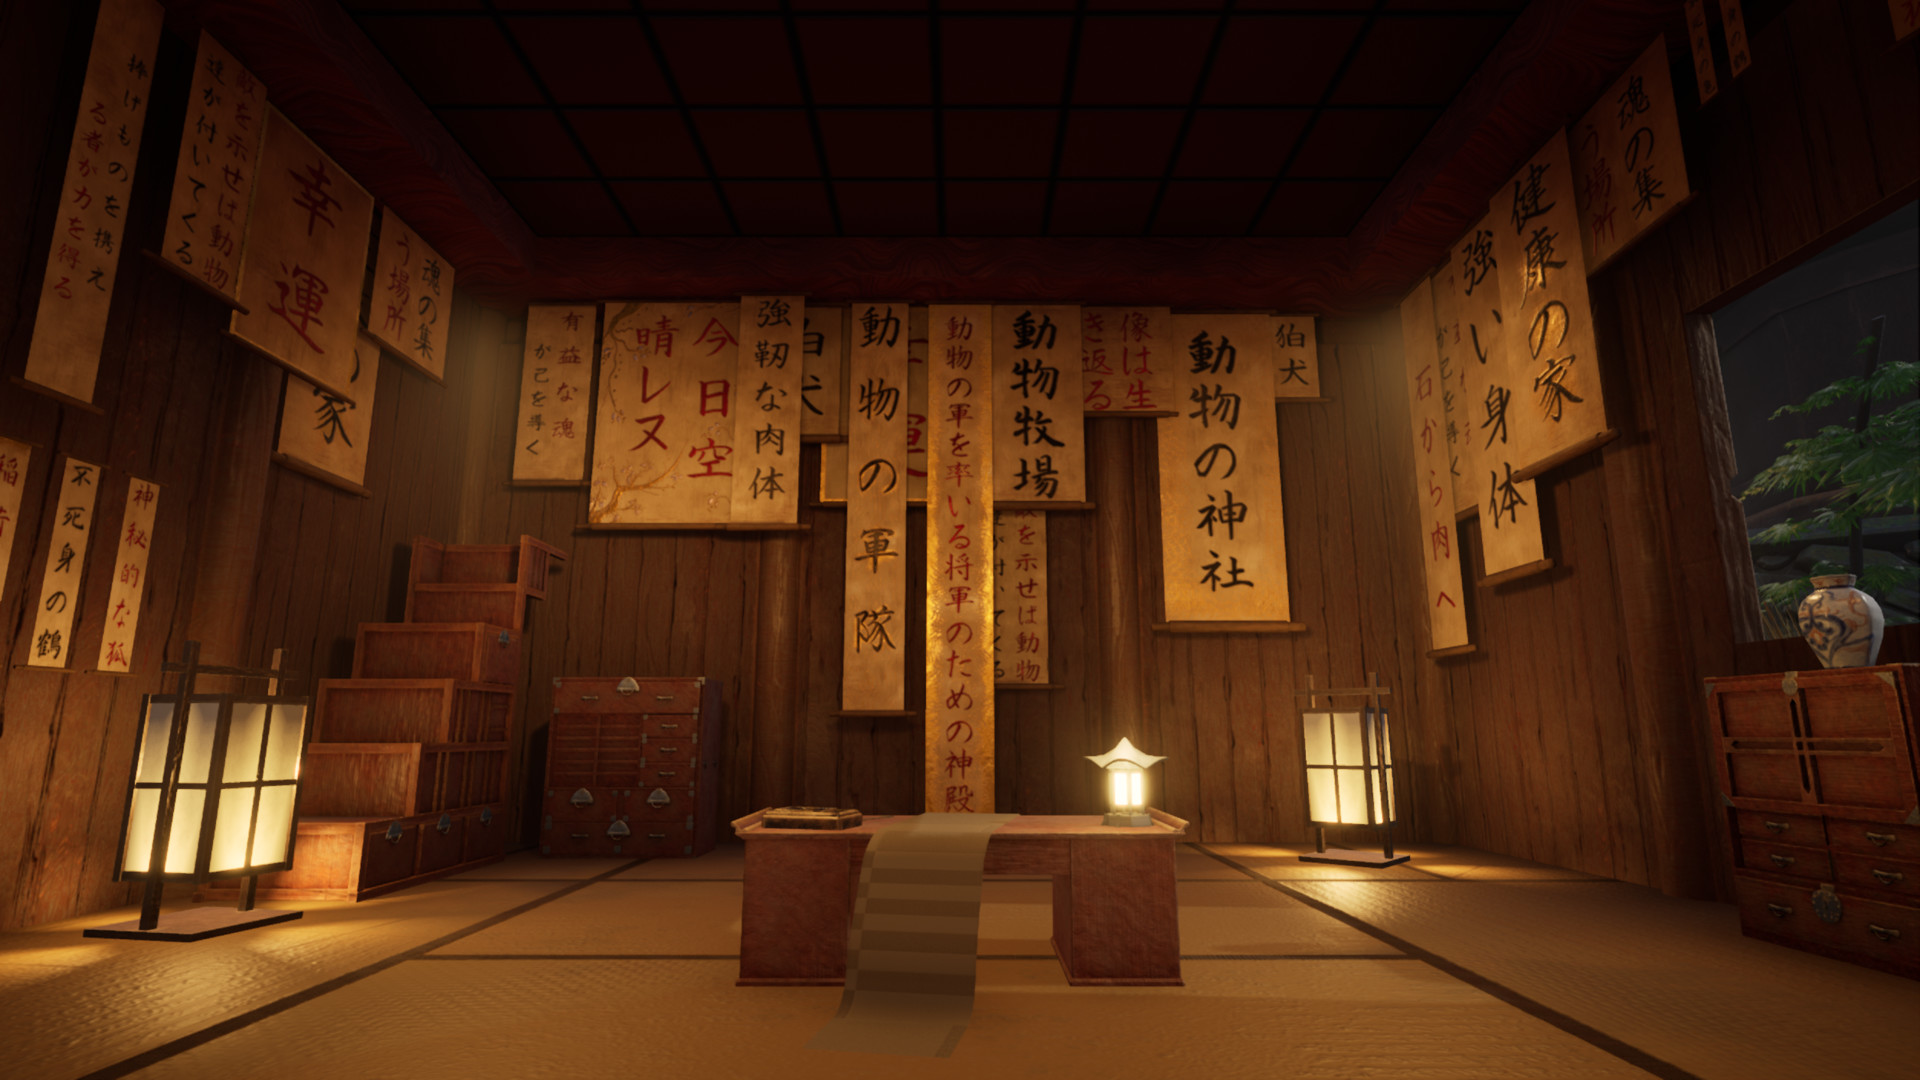 Screenshot from the very front of entering the calligraphers hut. Shows the interior with the hanging scrolls now fully textured in intricate gold leaf surfaces with red and black ink on top. The furniture around the place is now fully finished too. Only the scroll on the writing desk remains untextured yet.